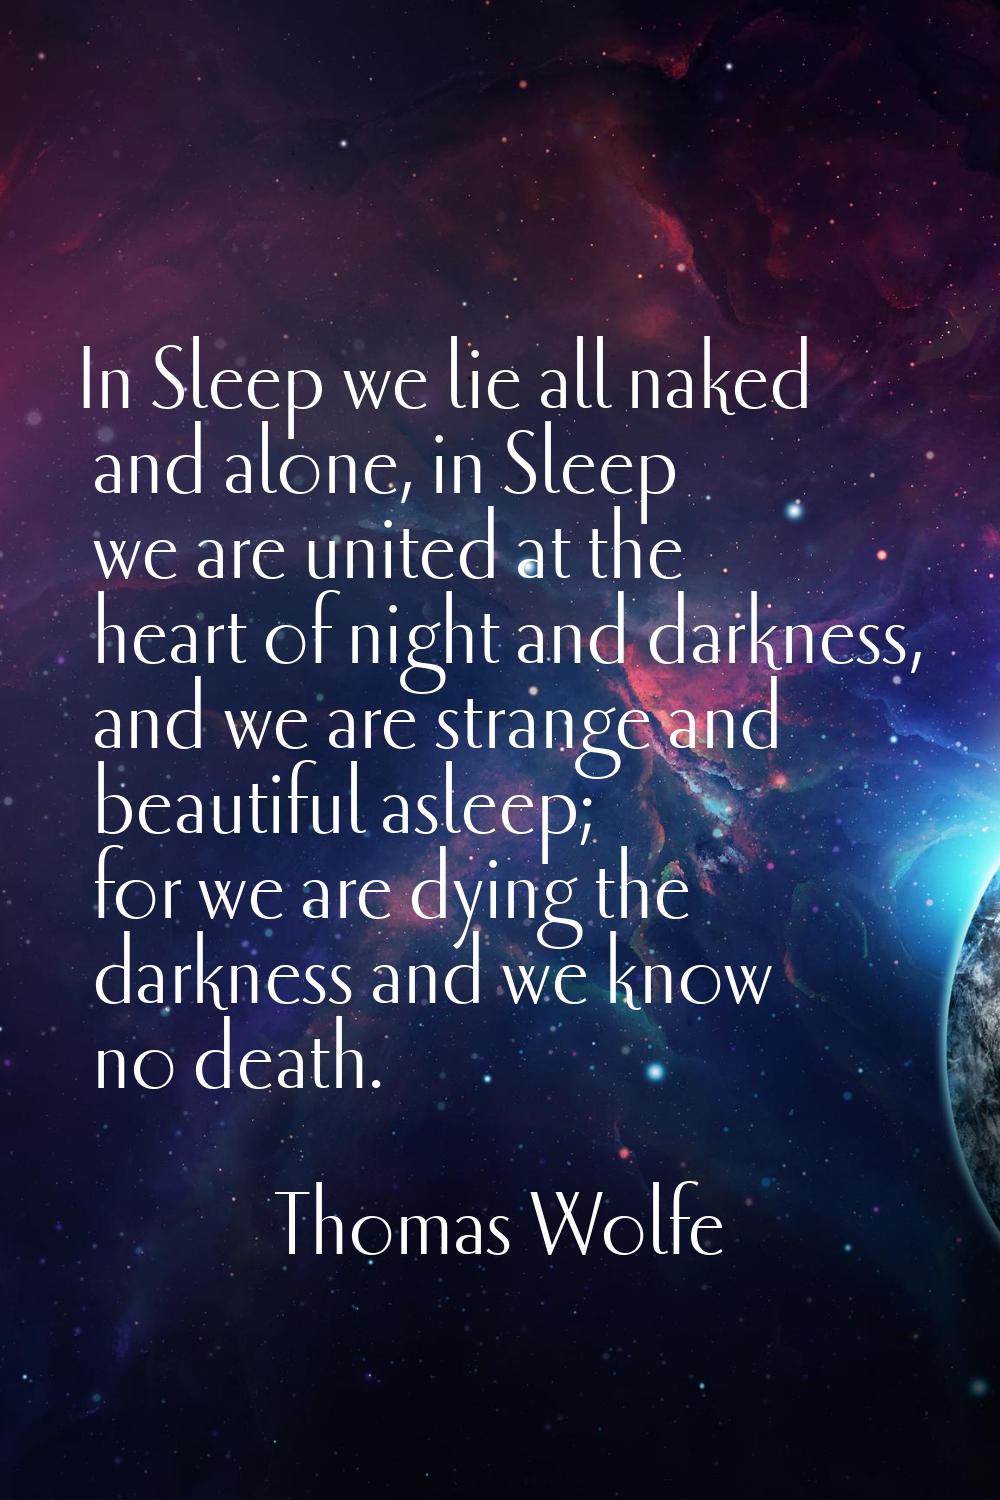 In Sleep we lie all naked and alone, in Sleep we are united at the heart of night and darkness, and